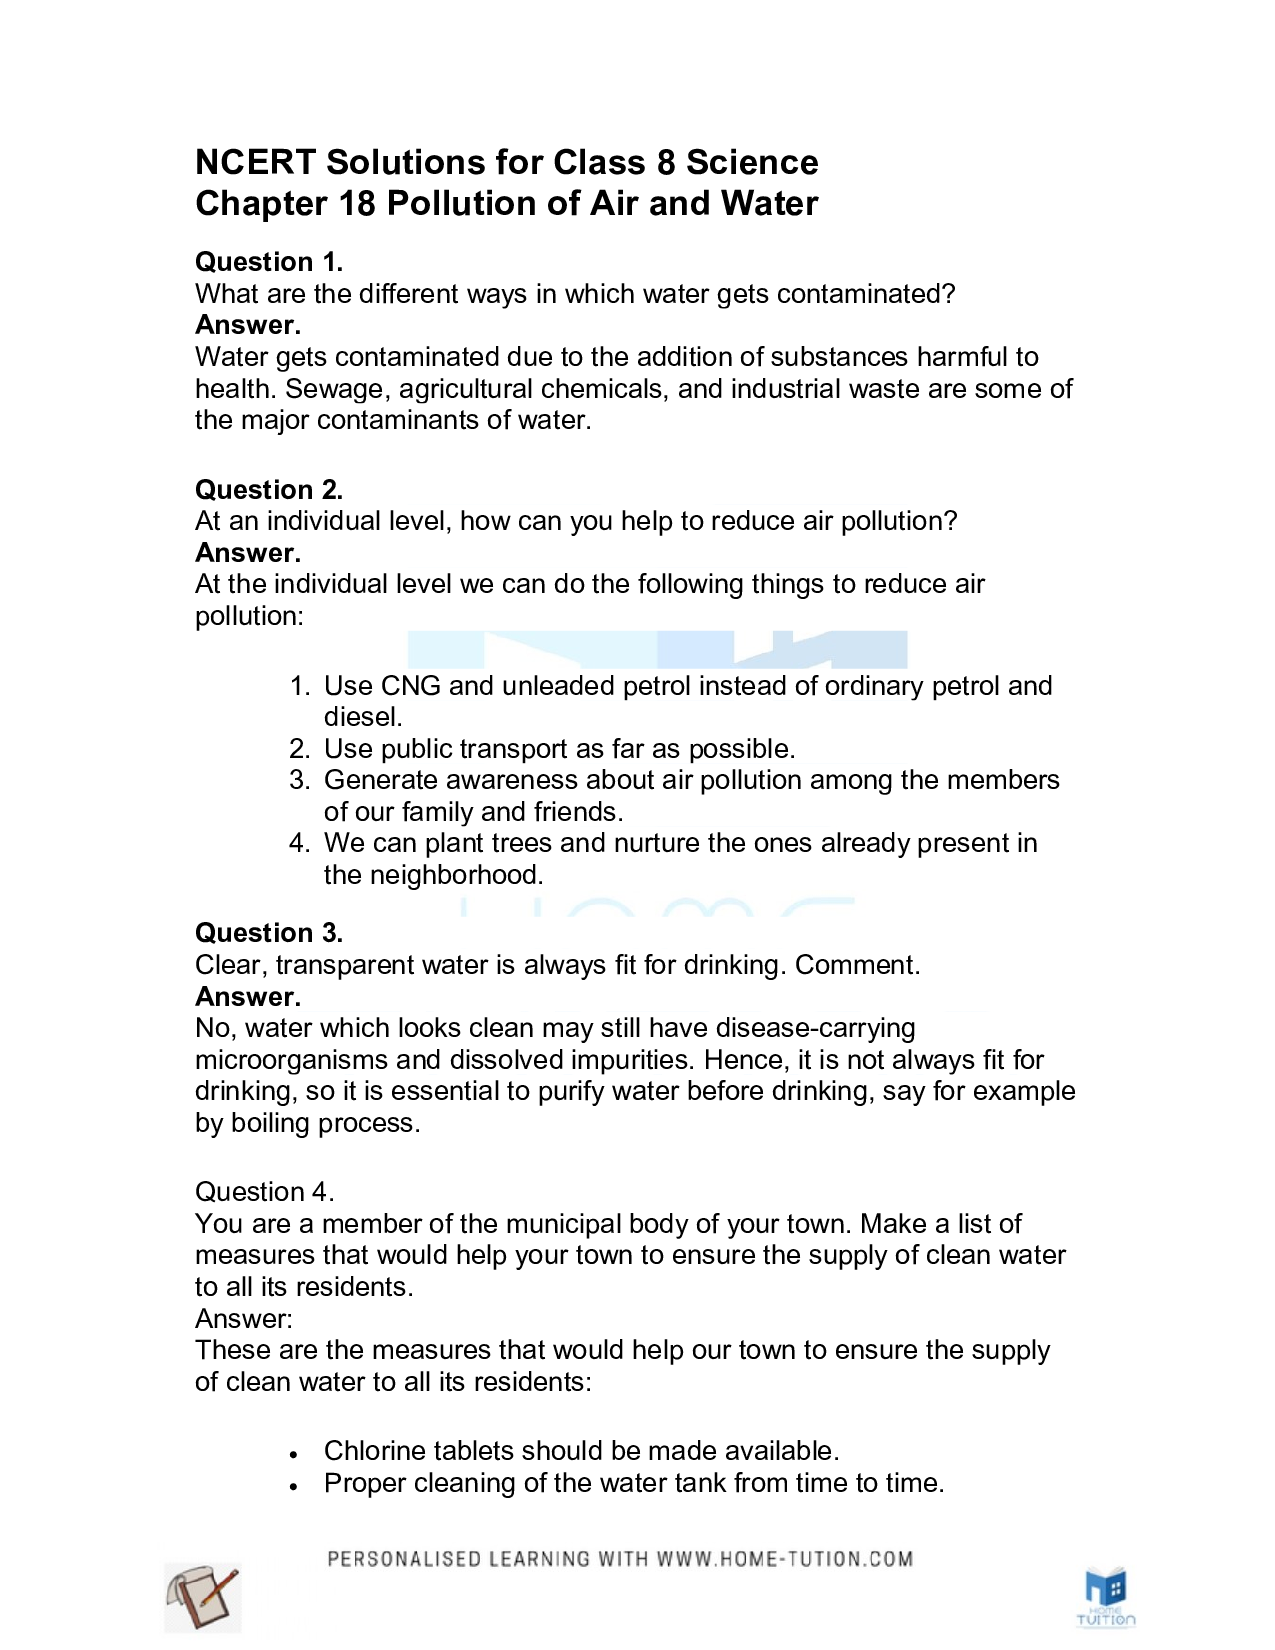 Class 8 Science Chapter 18 Pollution of Air and Water